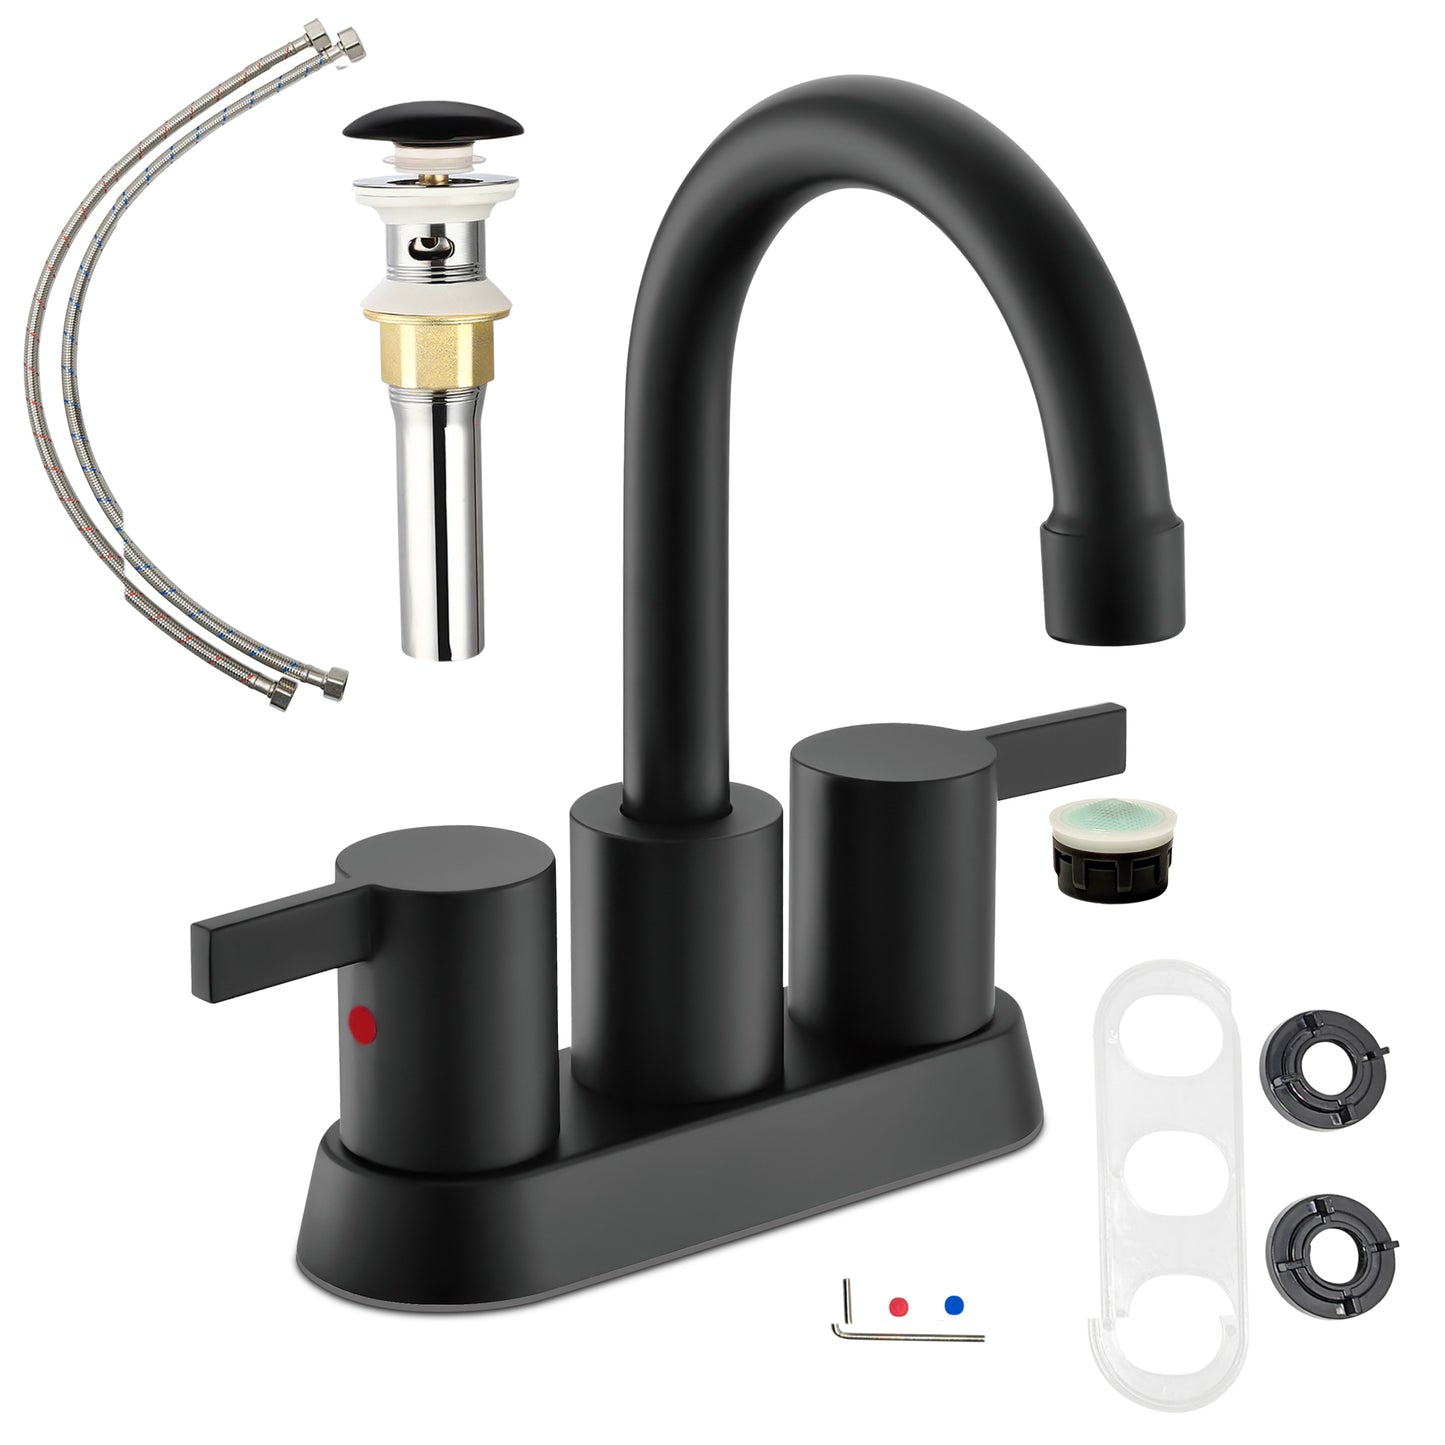 Modern white 2 handle bathroom faucet with white pop-up drain and hoses.